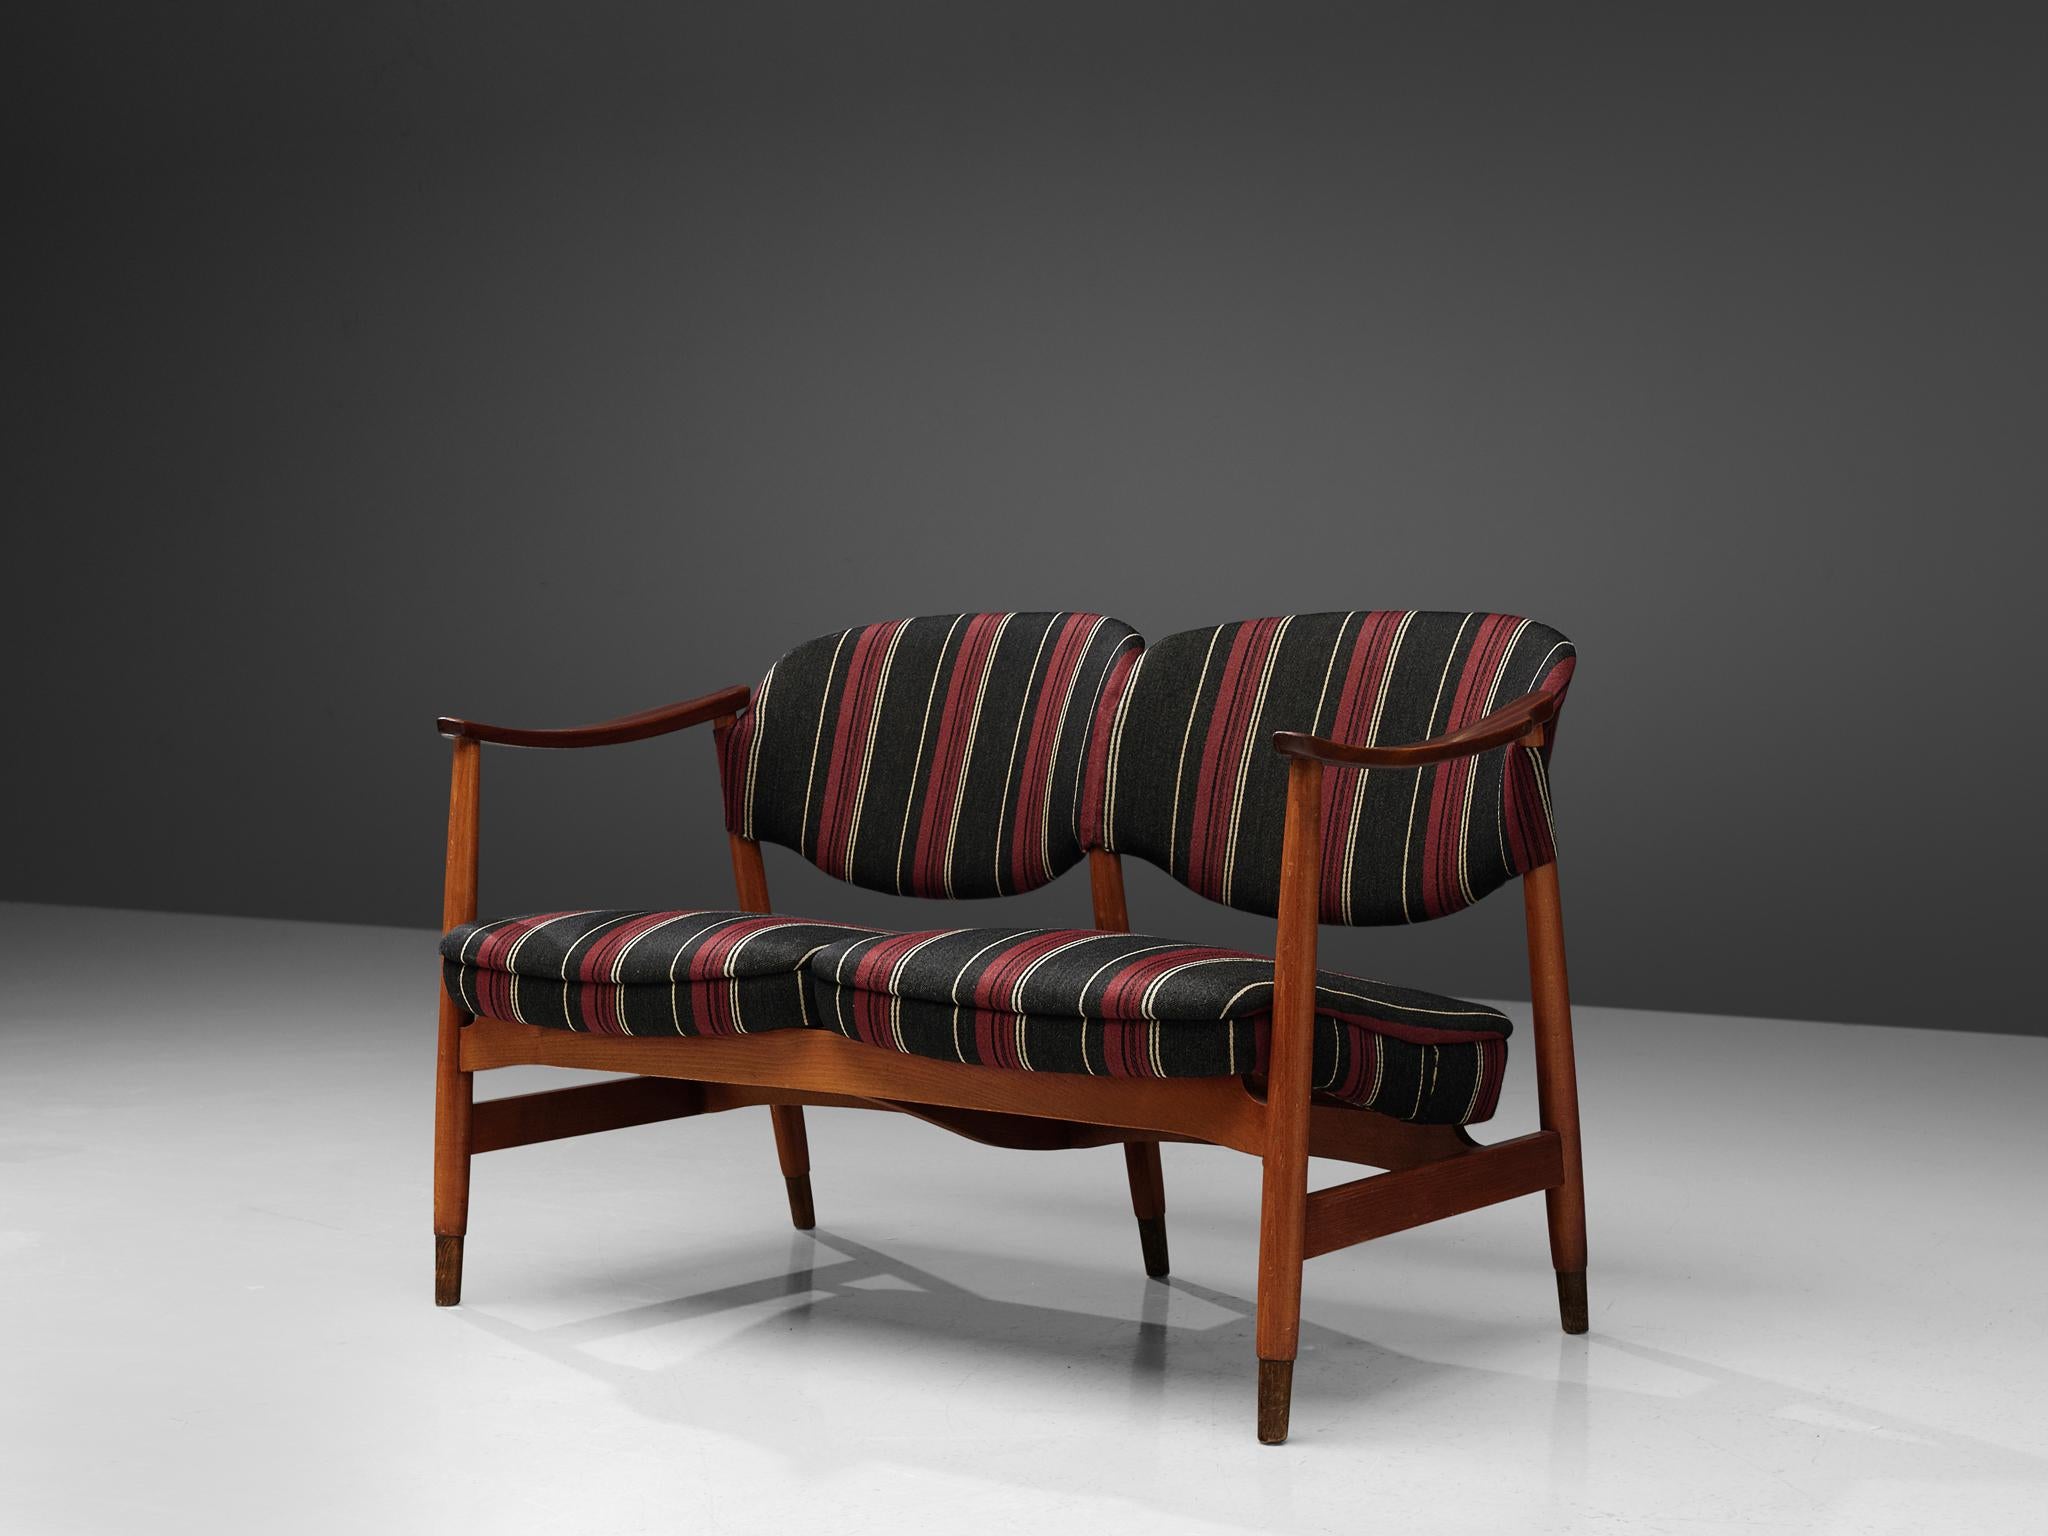 Olav Anker Hessen, settee, model '166', fabric, ash, mahogany, Norway, 1950s

A Scandinavian Modern settee by Olav Anker Hessen crafted in an admirable manner. The frame is executed in ashwood, while the armrests are finished with lacquered mahogany